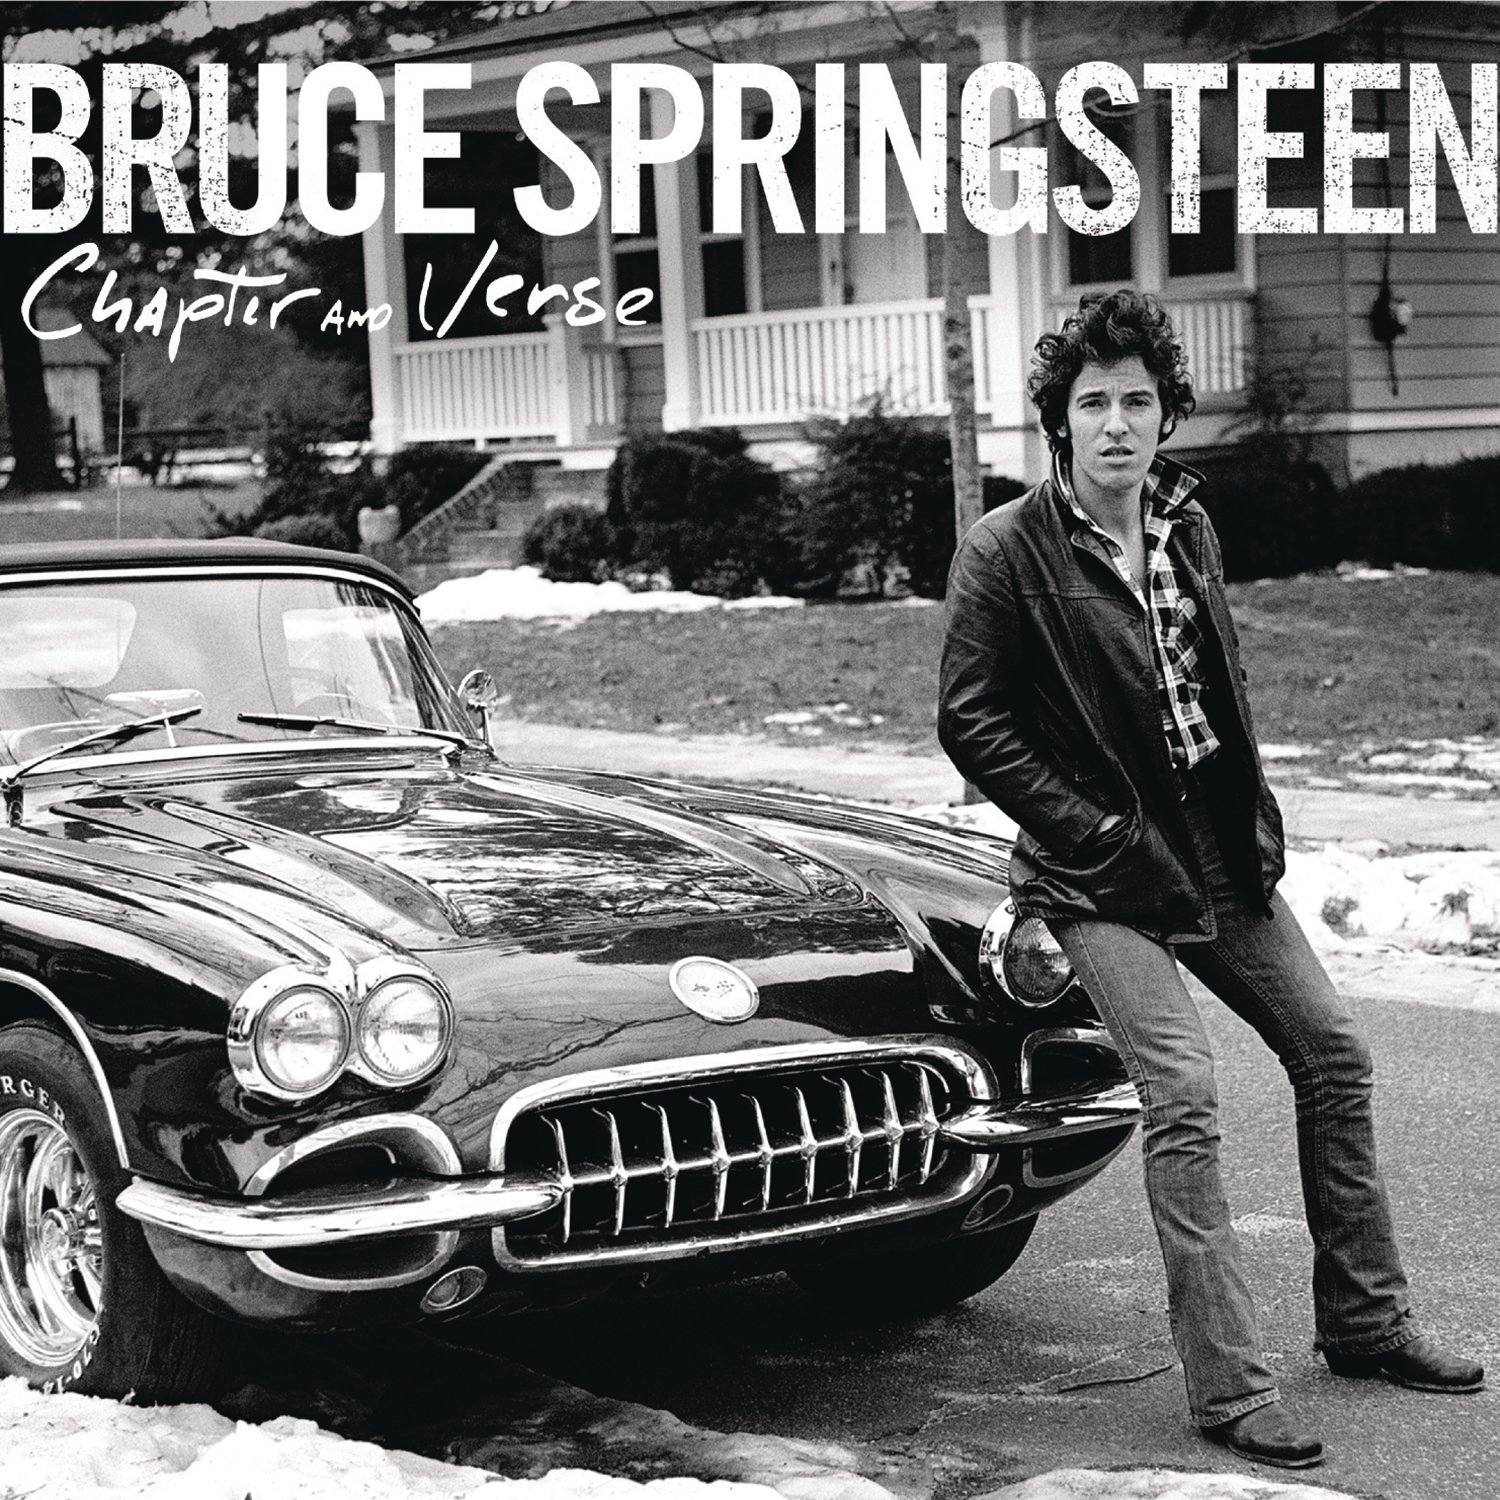 Bruce Springsteen – Chapter And Verse (2016) [HDTracks FLAC 24bit/96kHz]